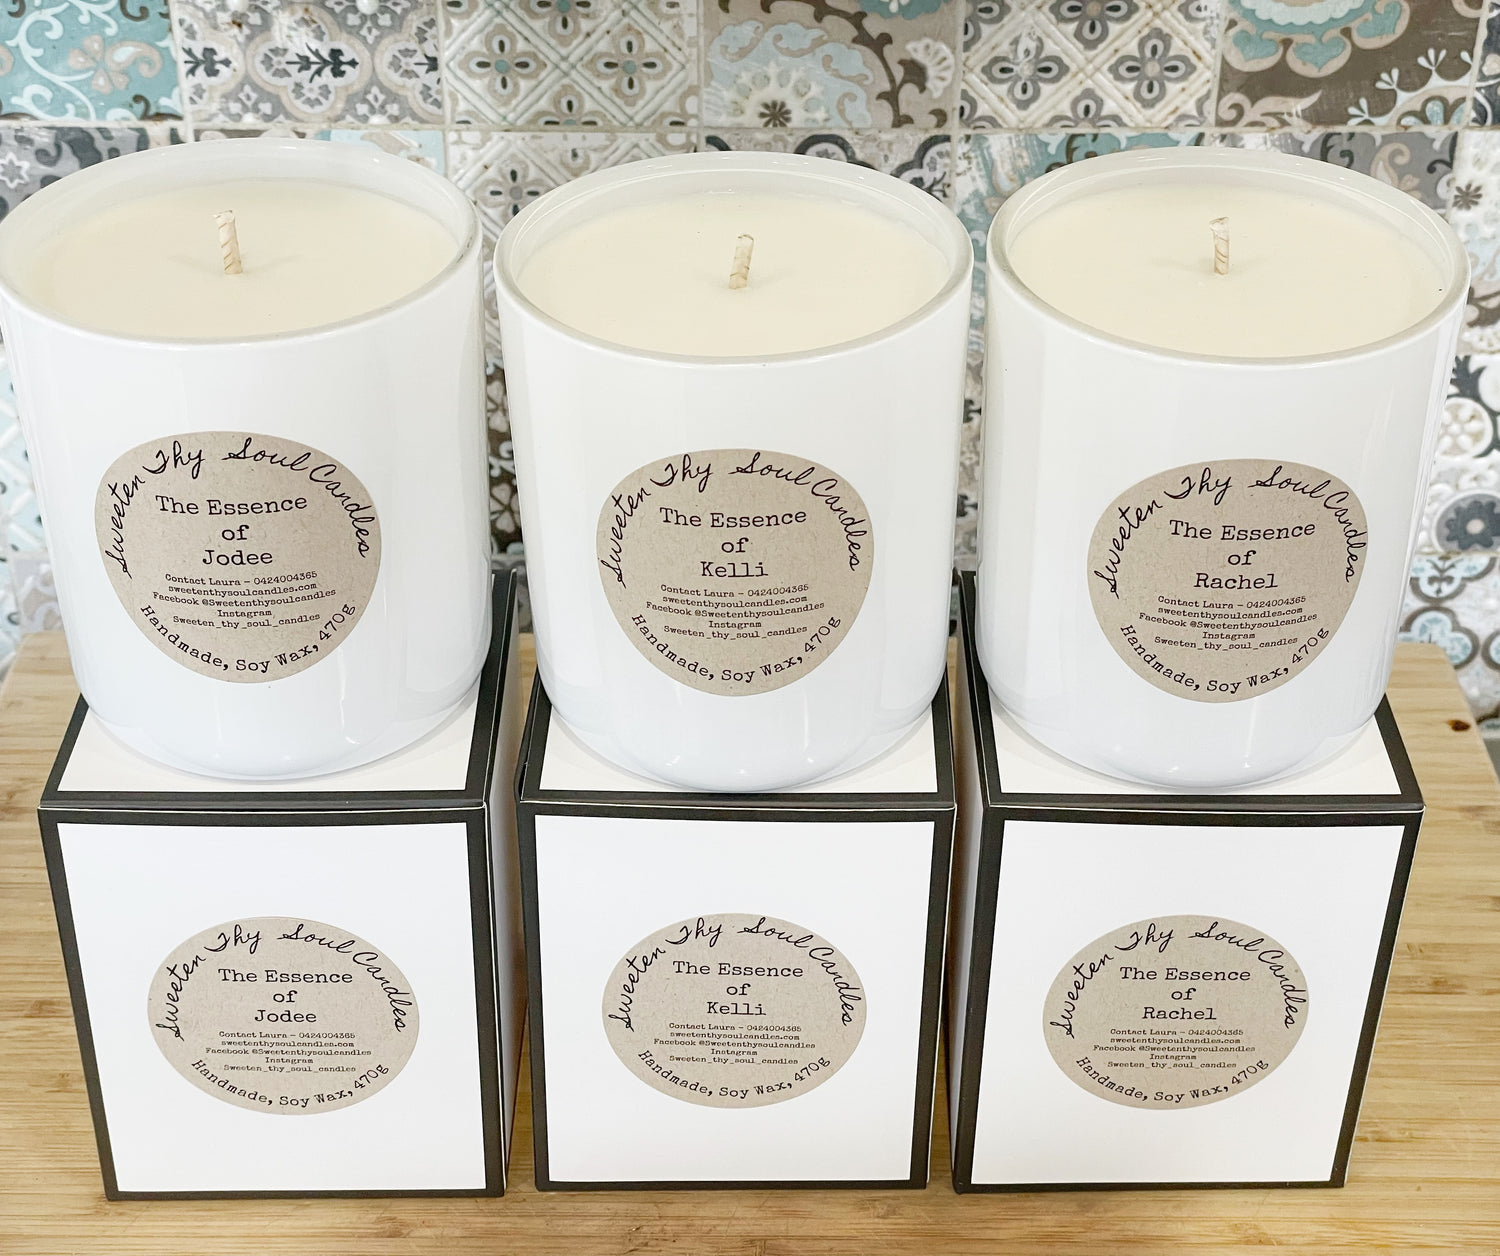 Discover "The Essence of" range. Personalised soy candles $33.95 each